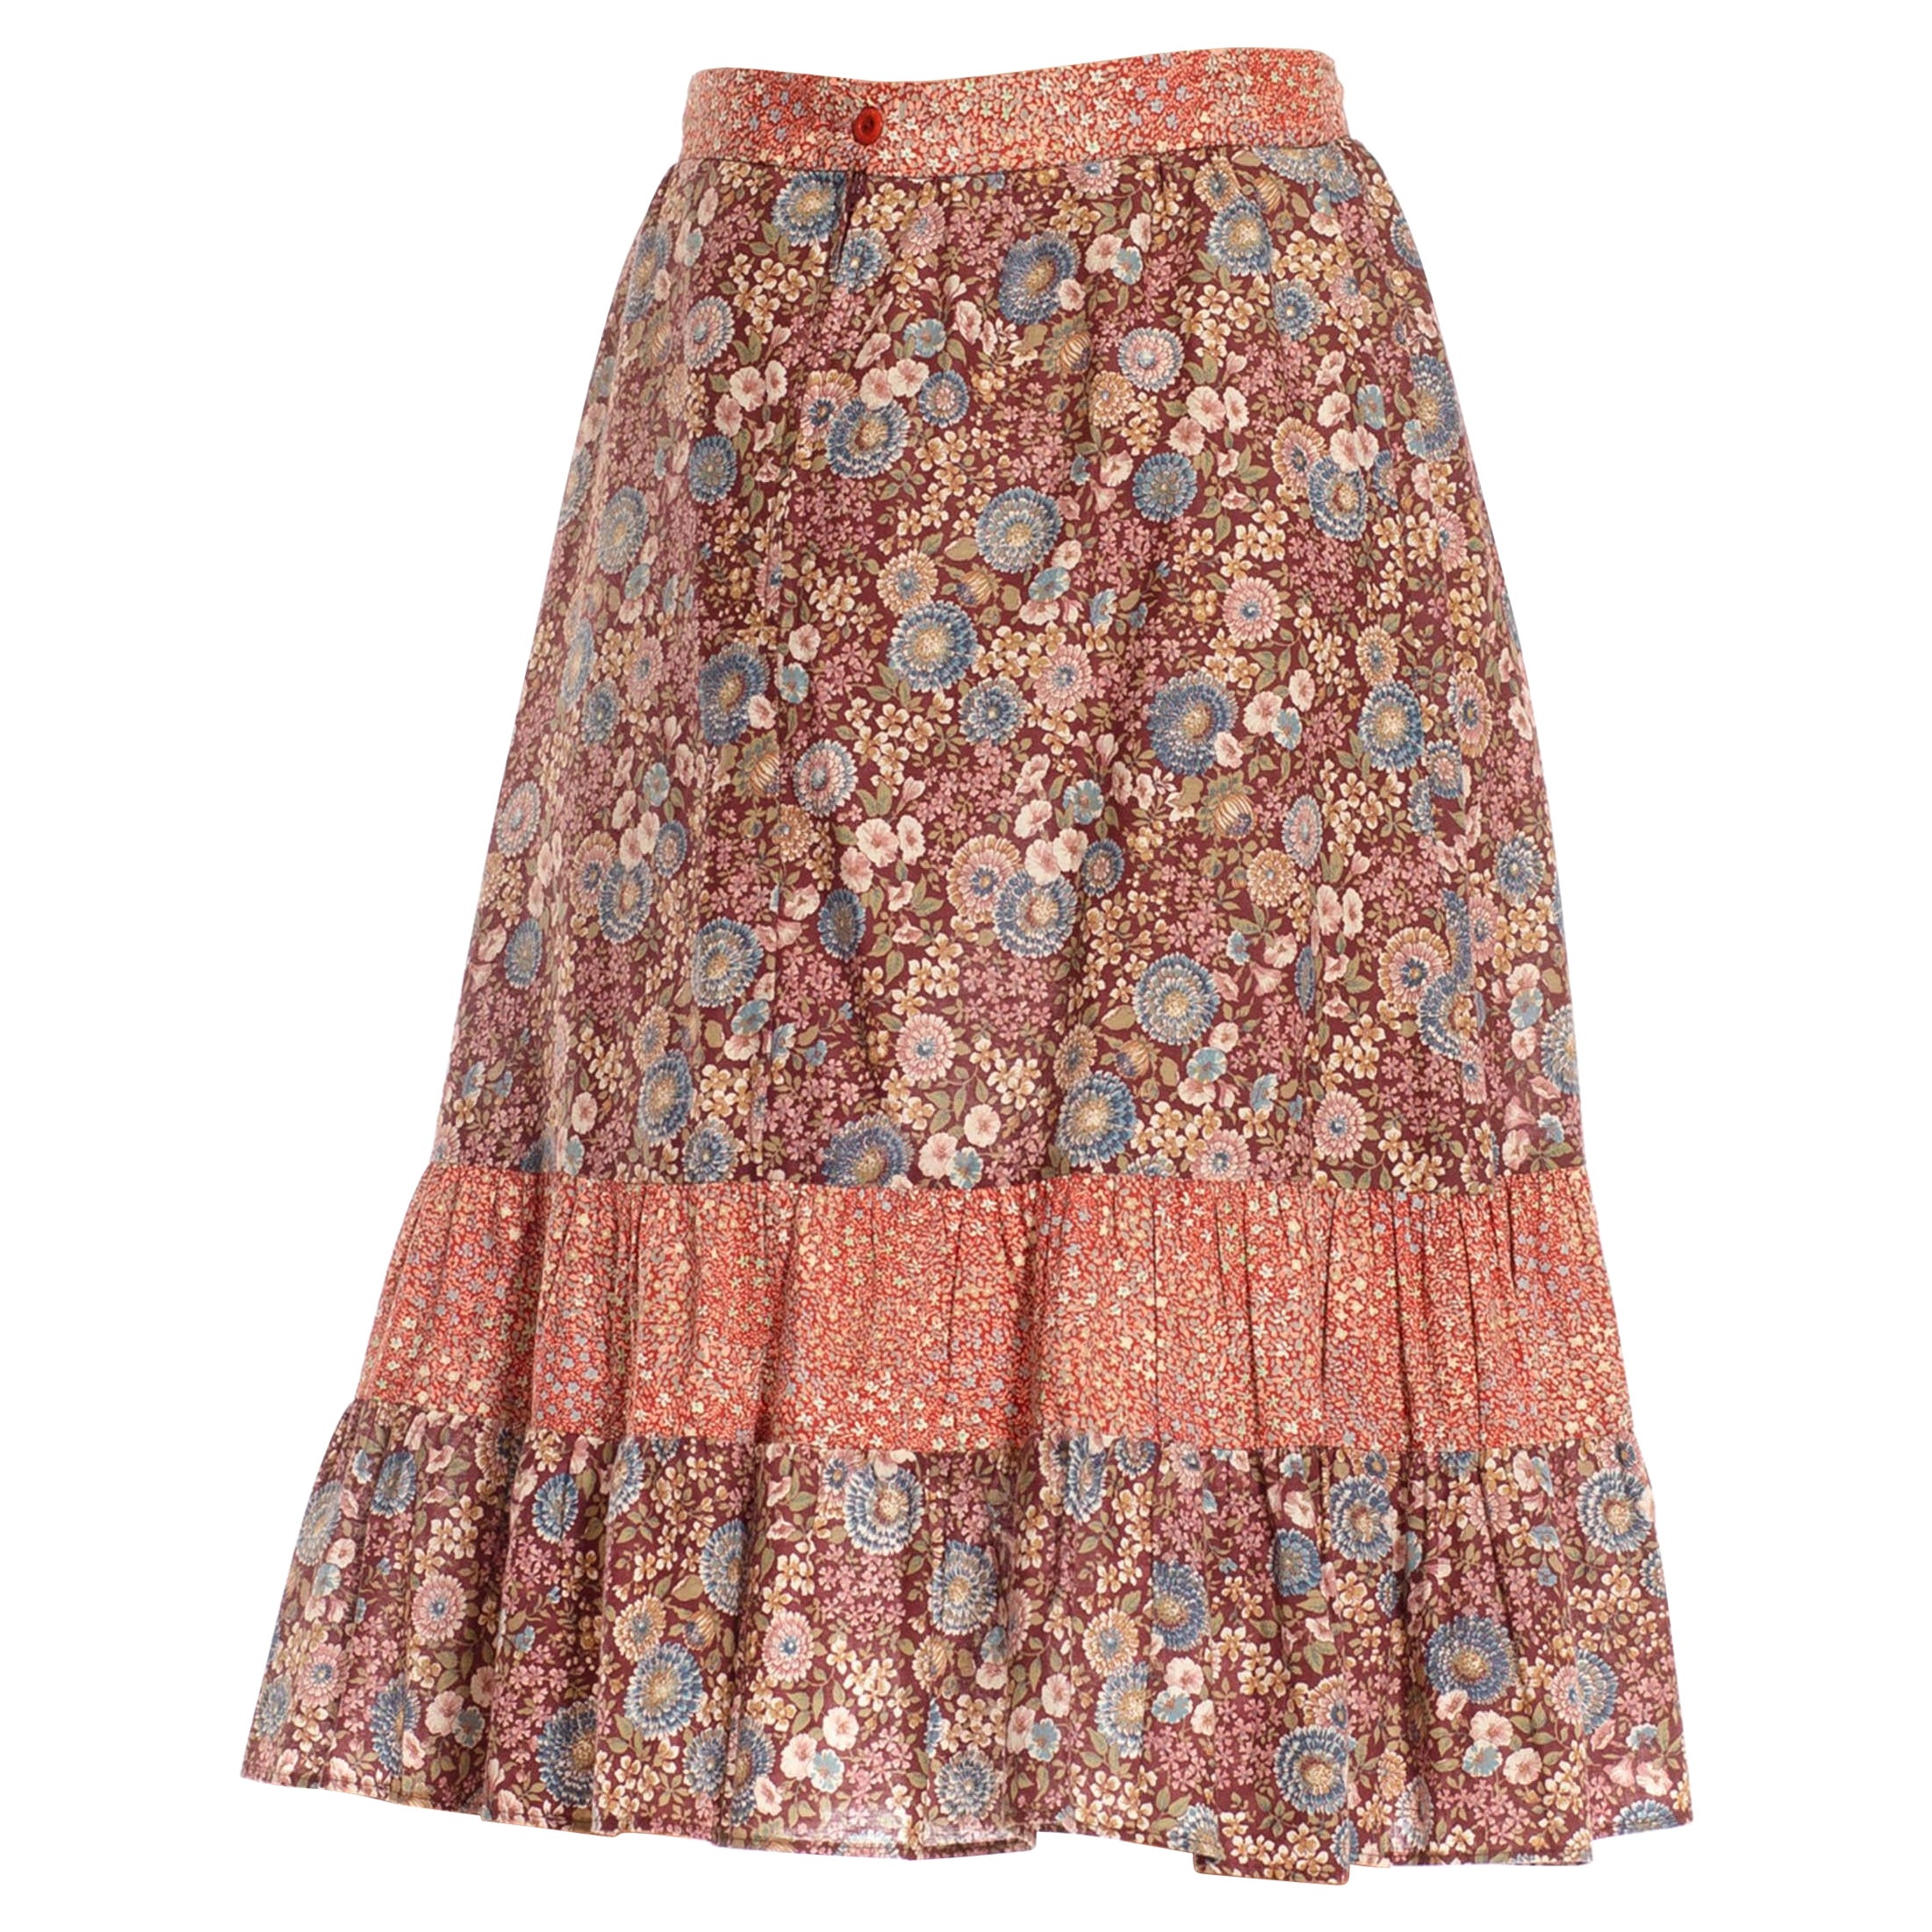 1970S Burgundy & Dusty Pink Cotton Ditsy Floral Print Mix Skirt